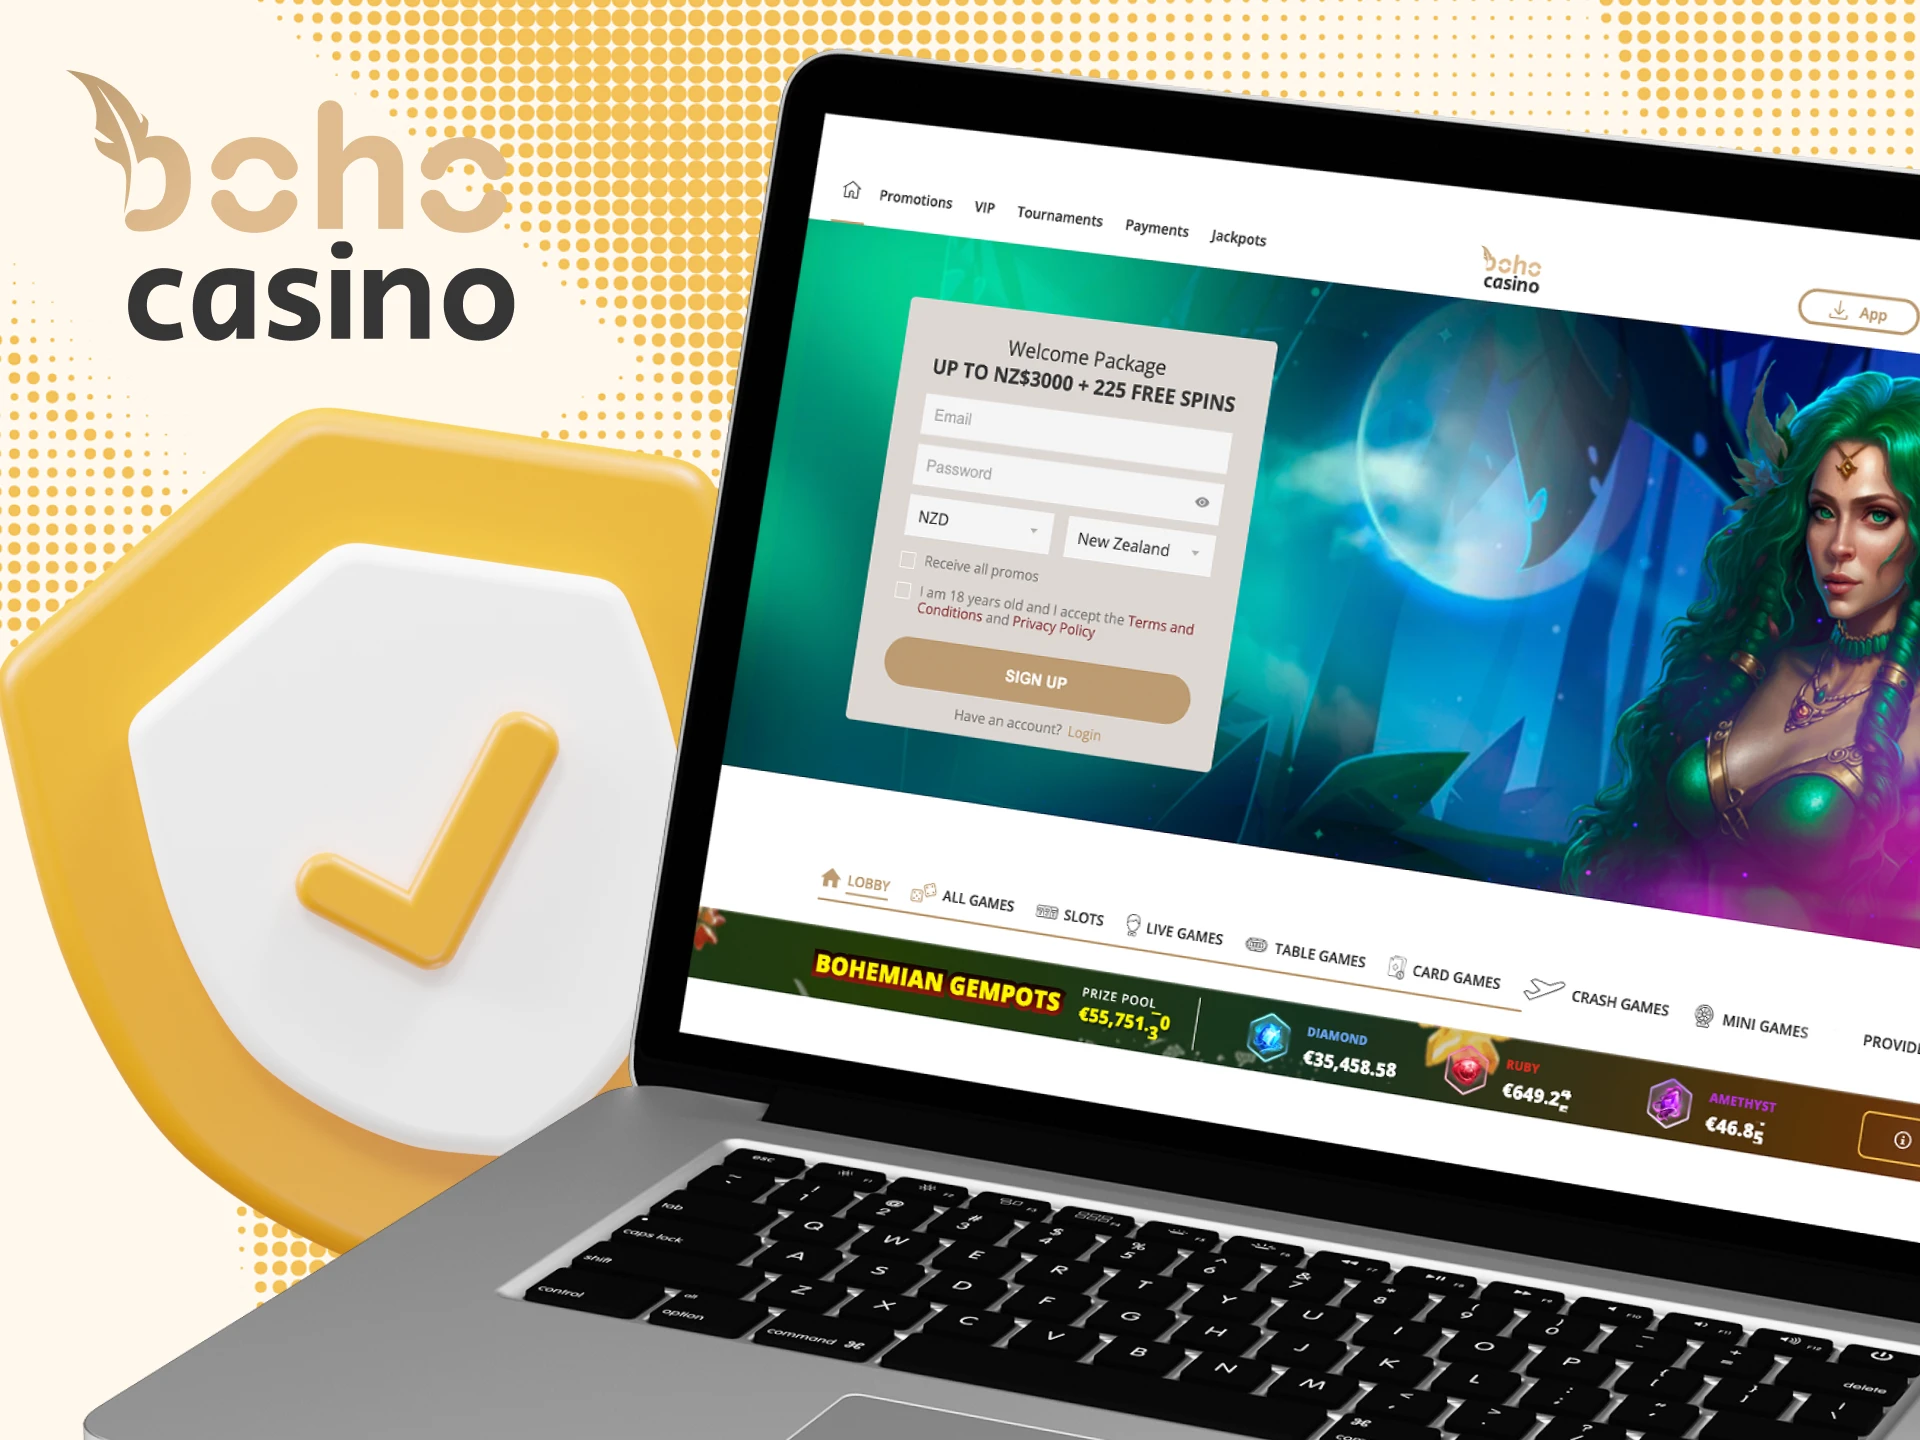 Boho Online Casino is legally registered in New Zealand.